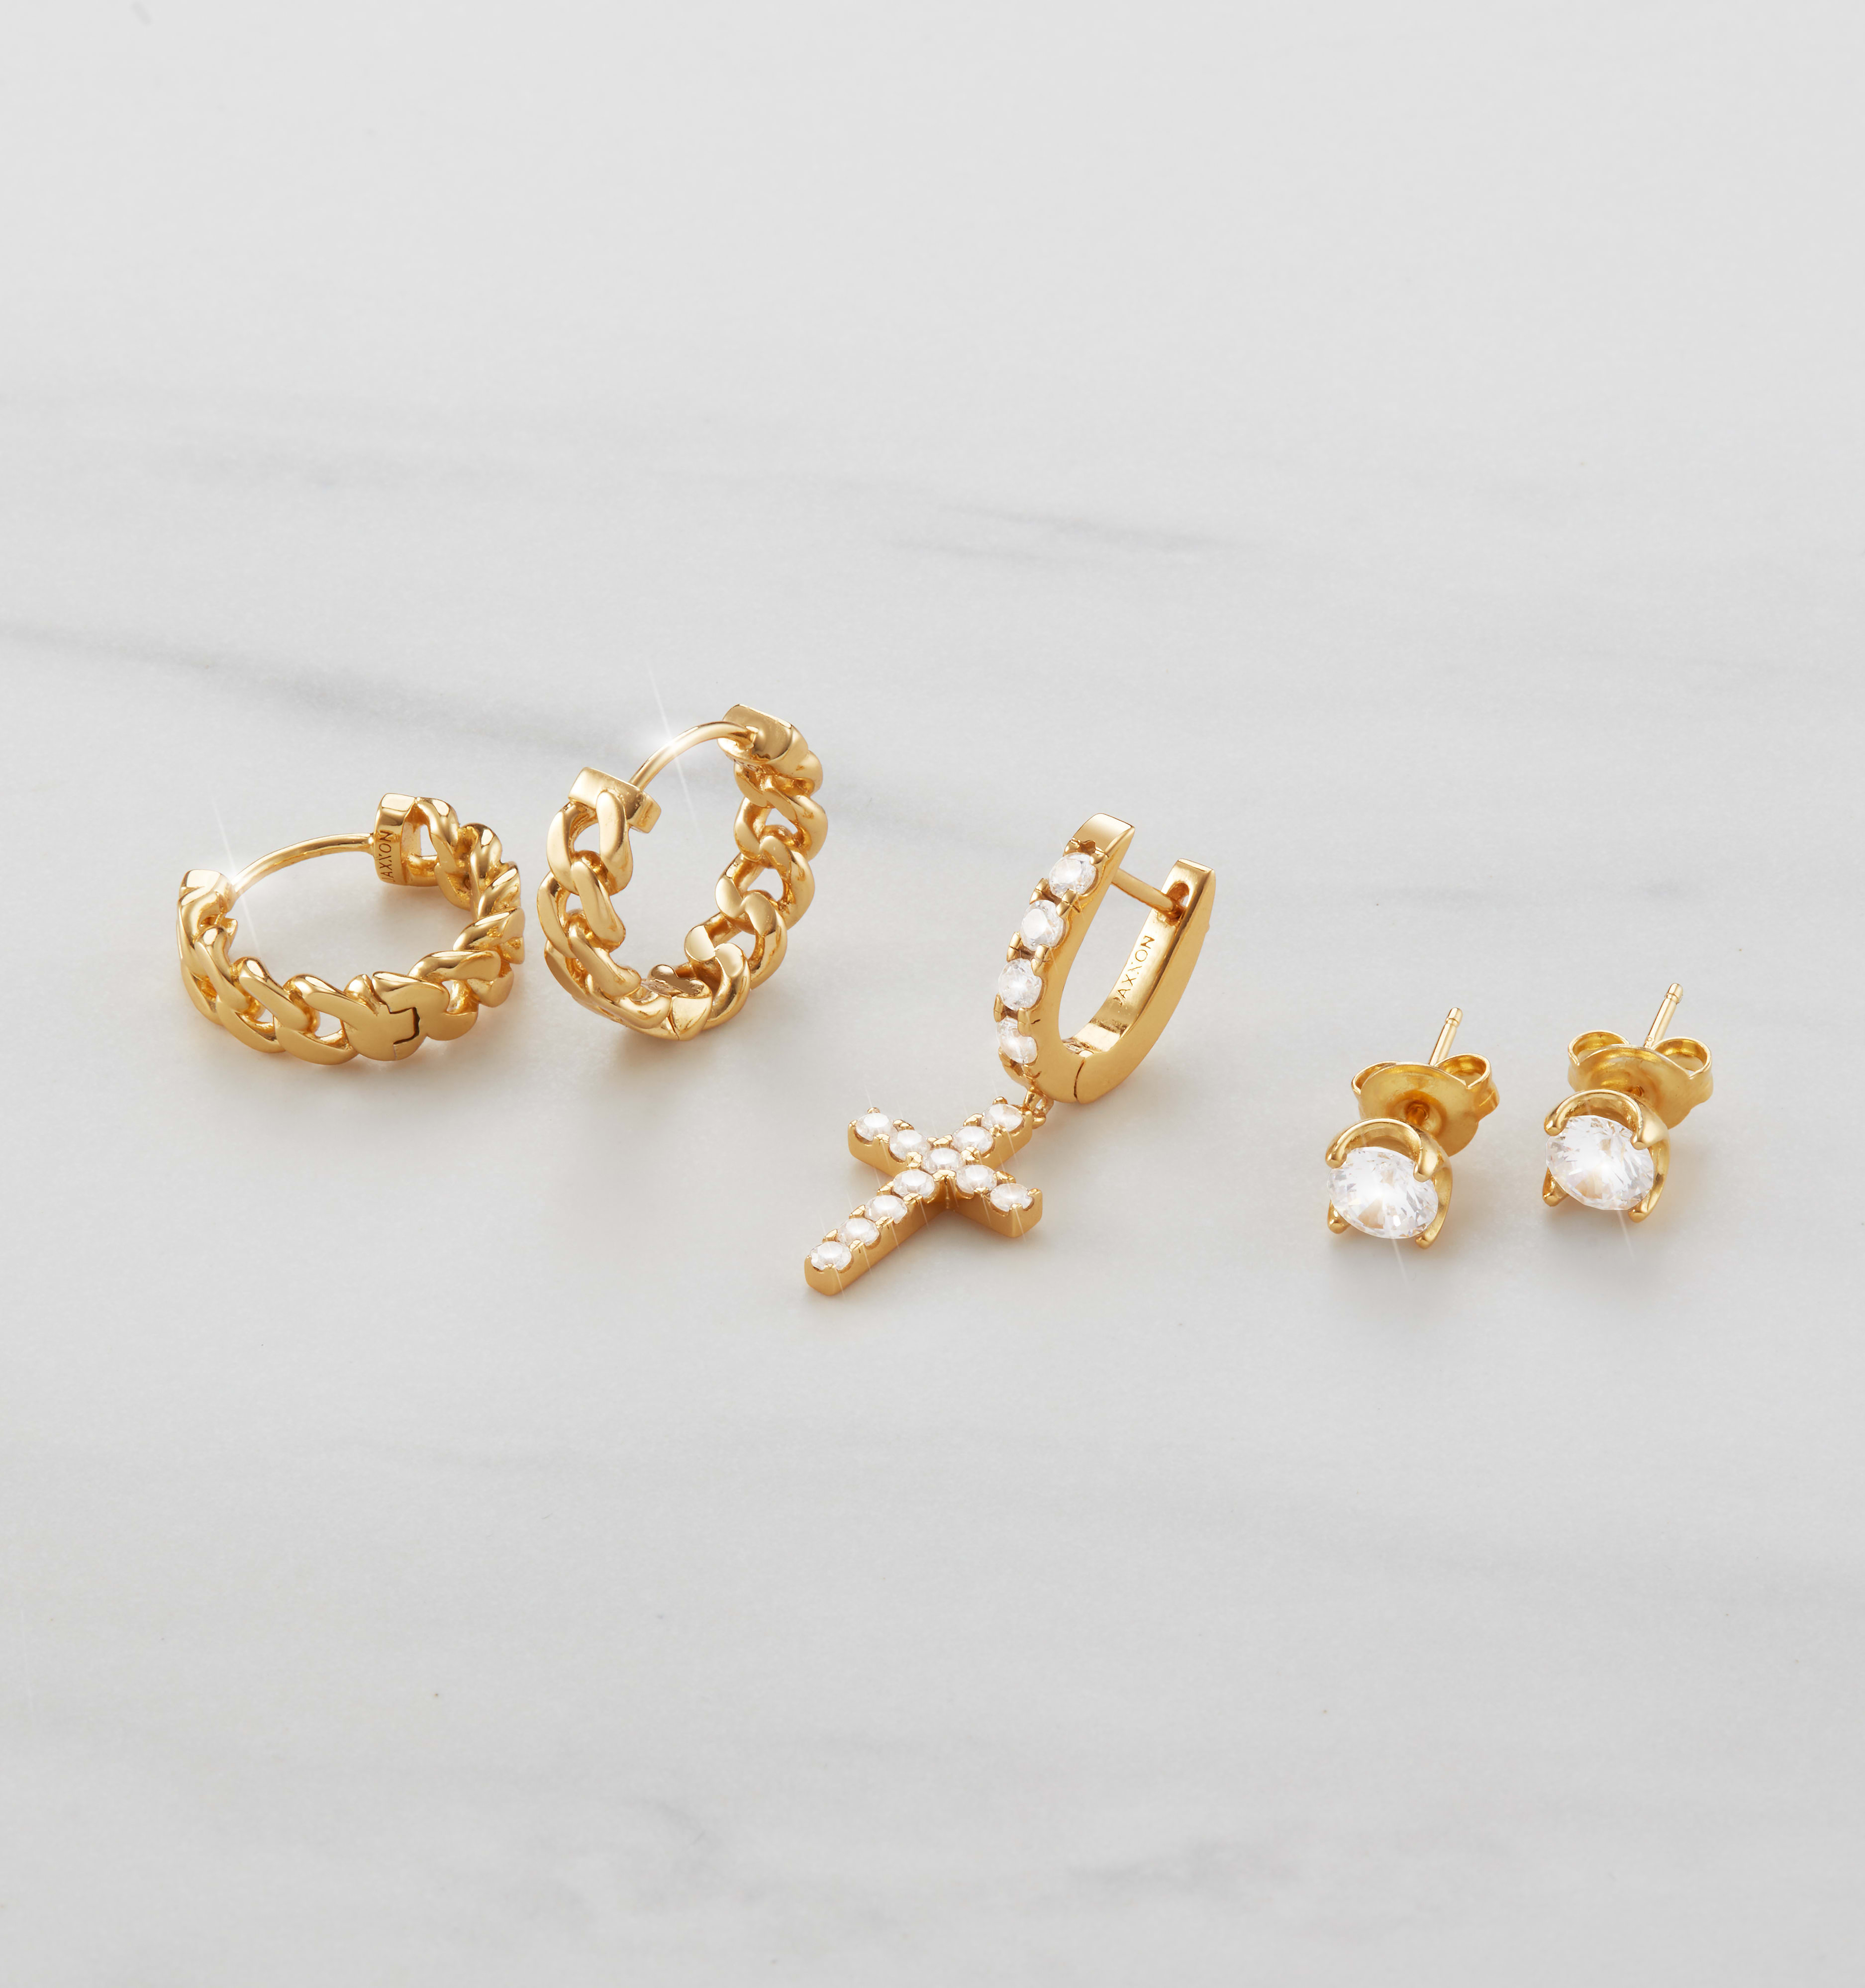 Image Gold Earrings - Quality & Comfort